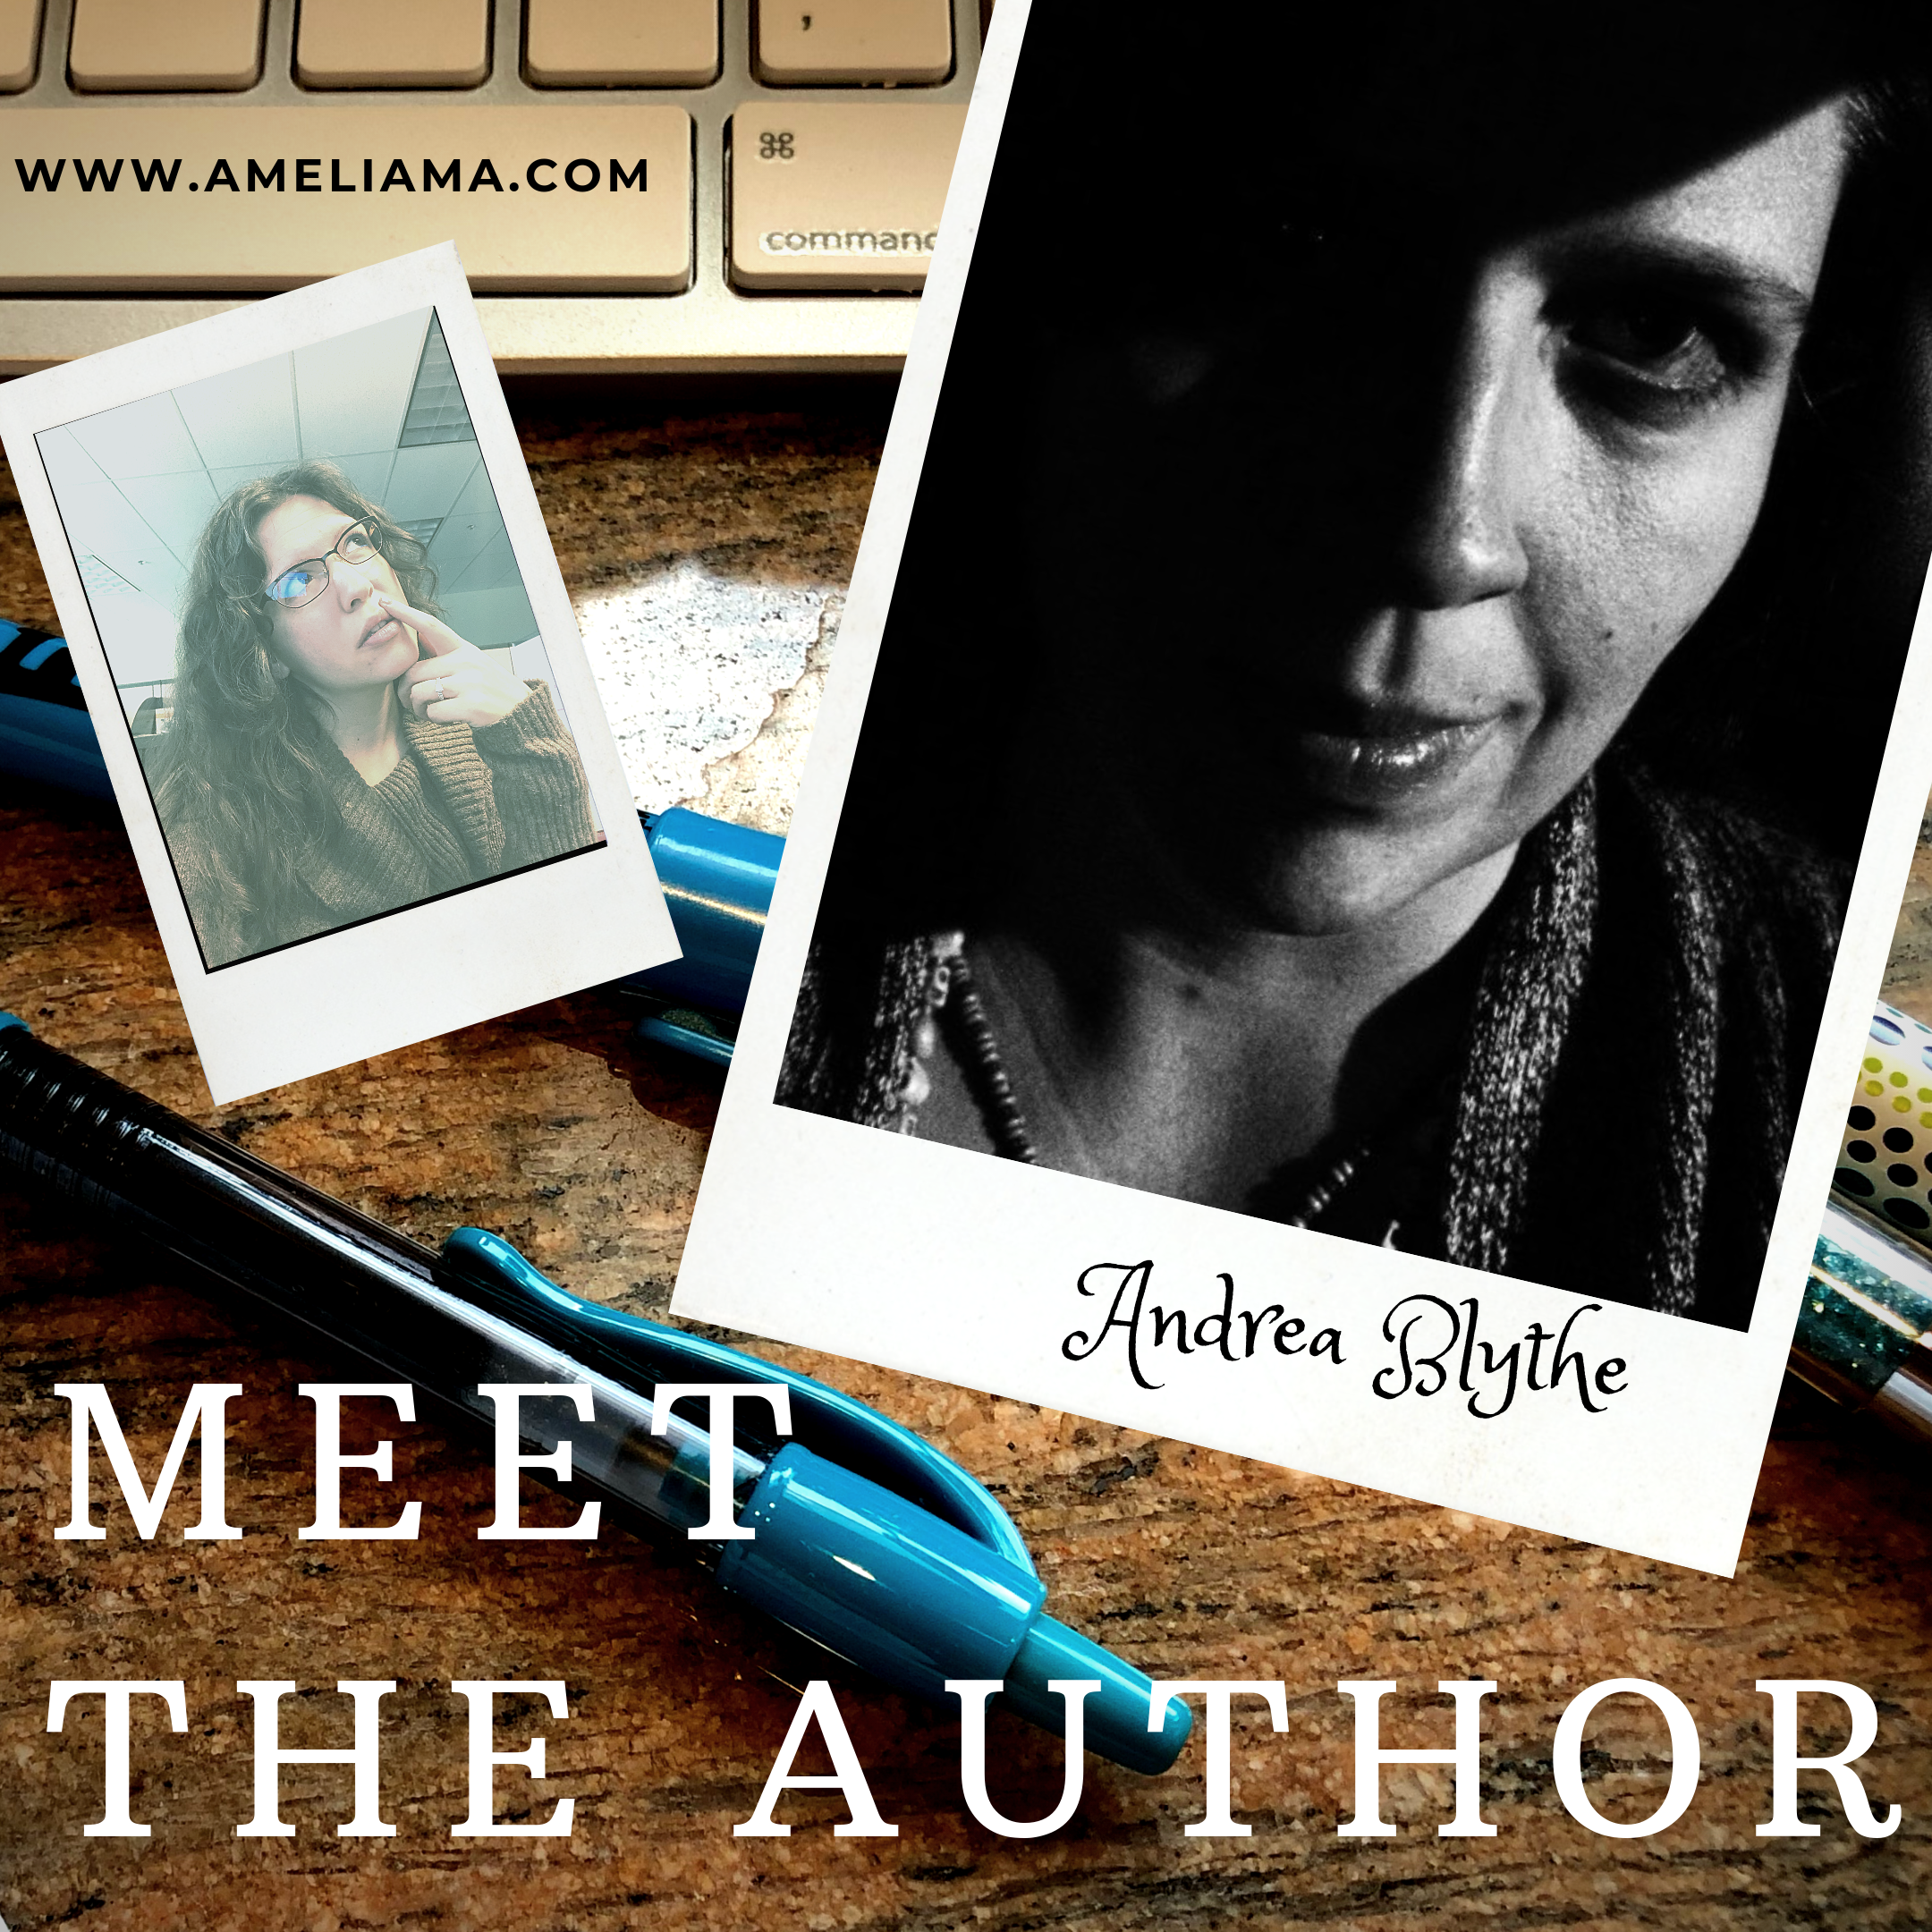 Meet the author, Andrea Blythe, an independent poet and creative writer.